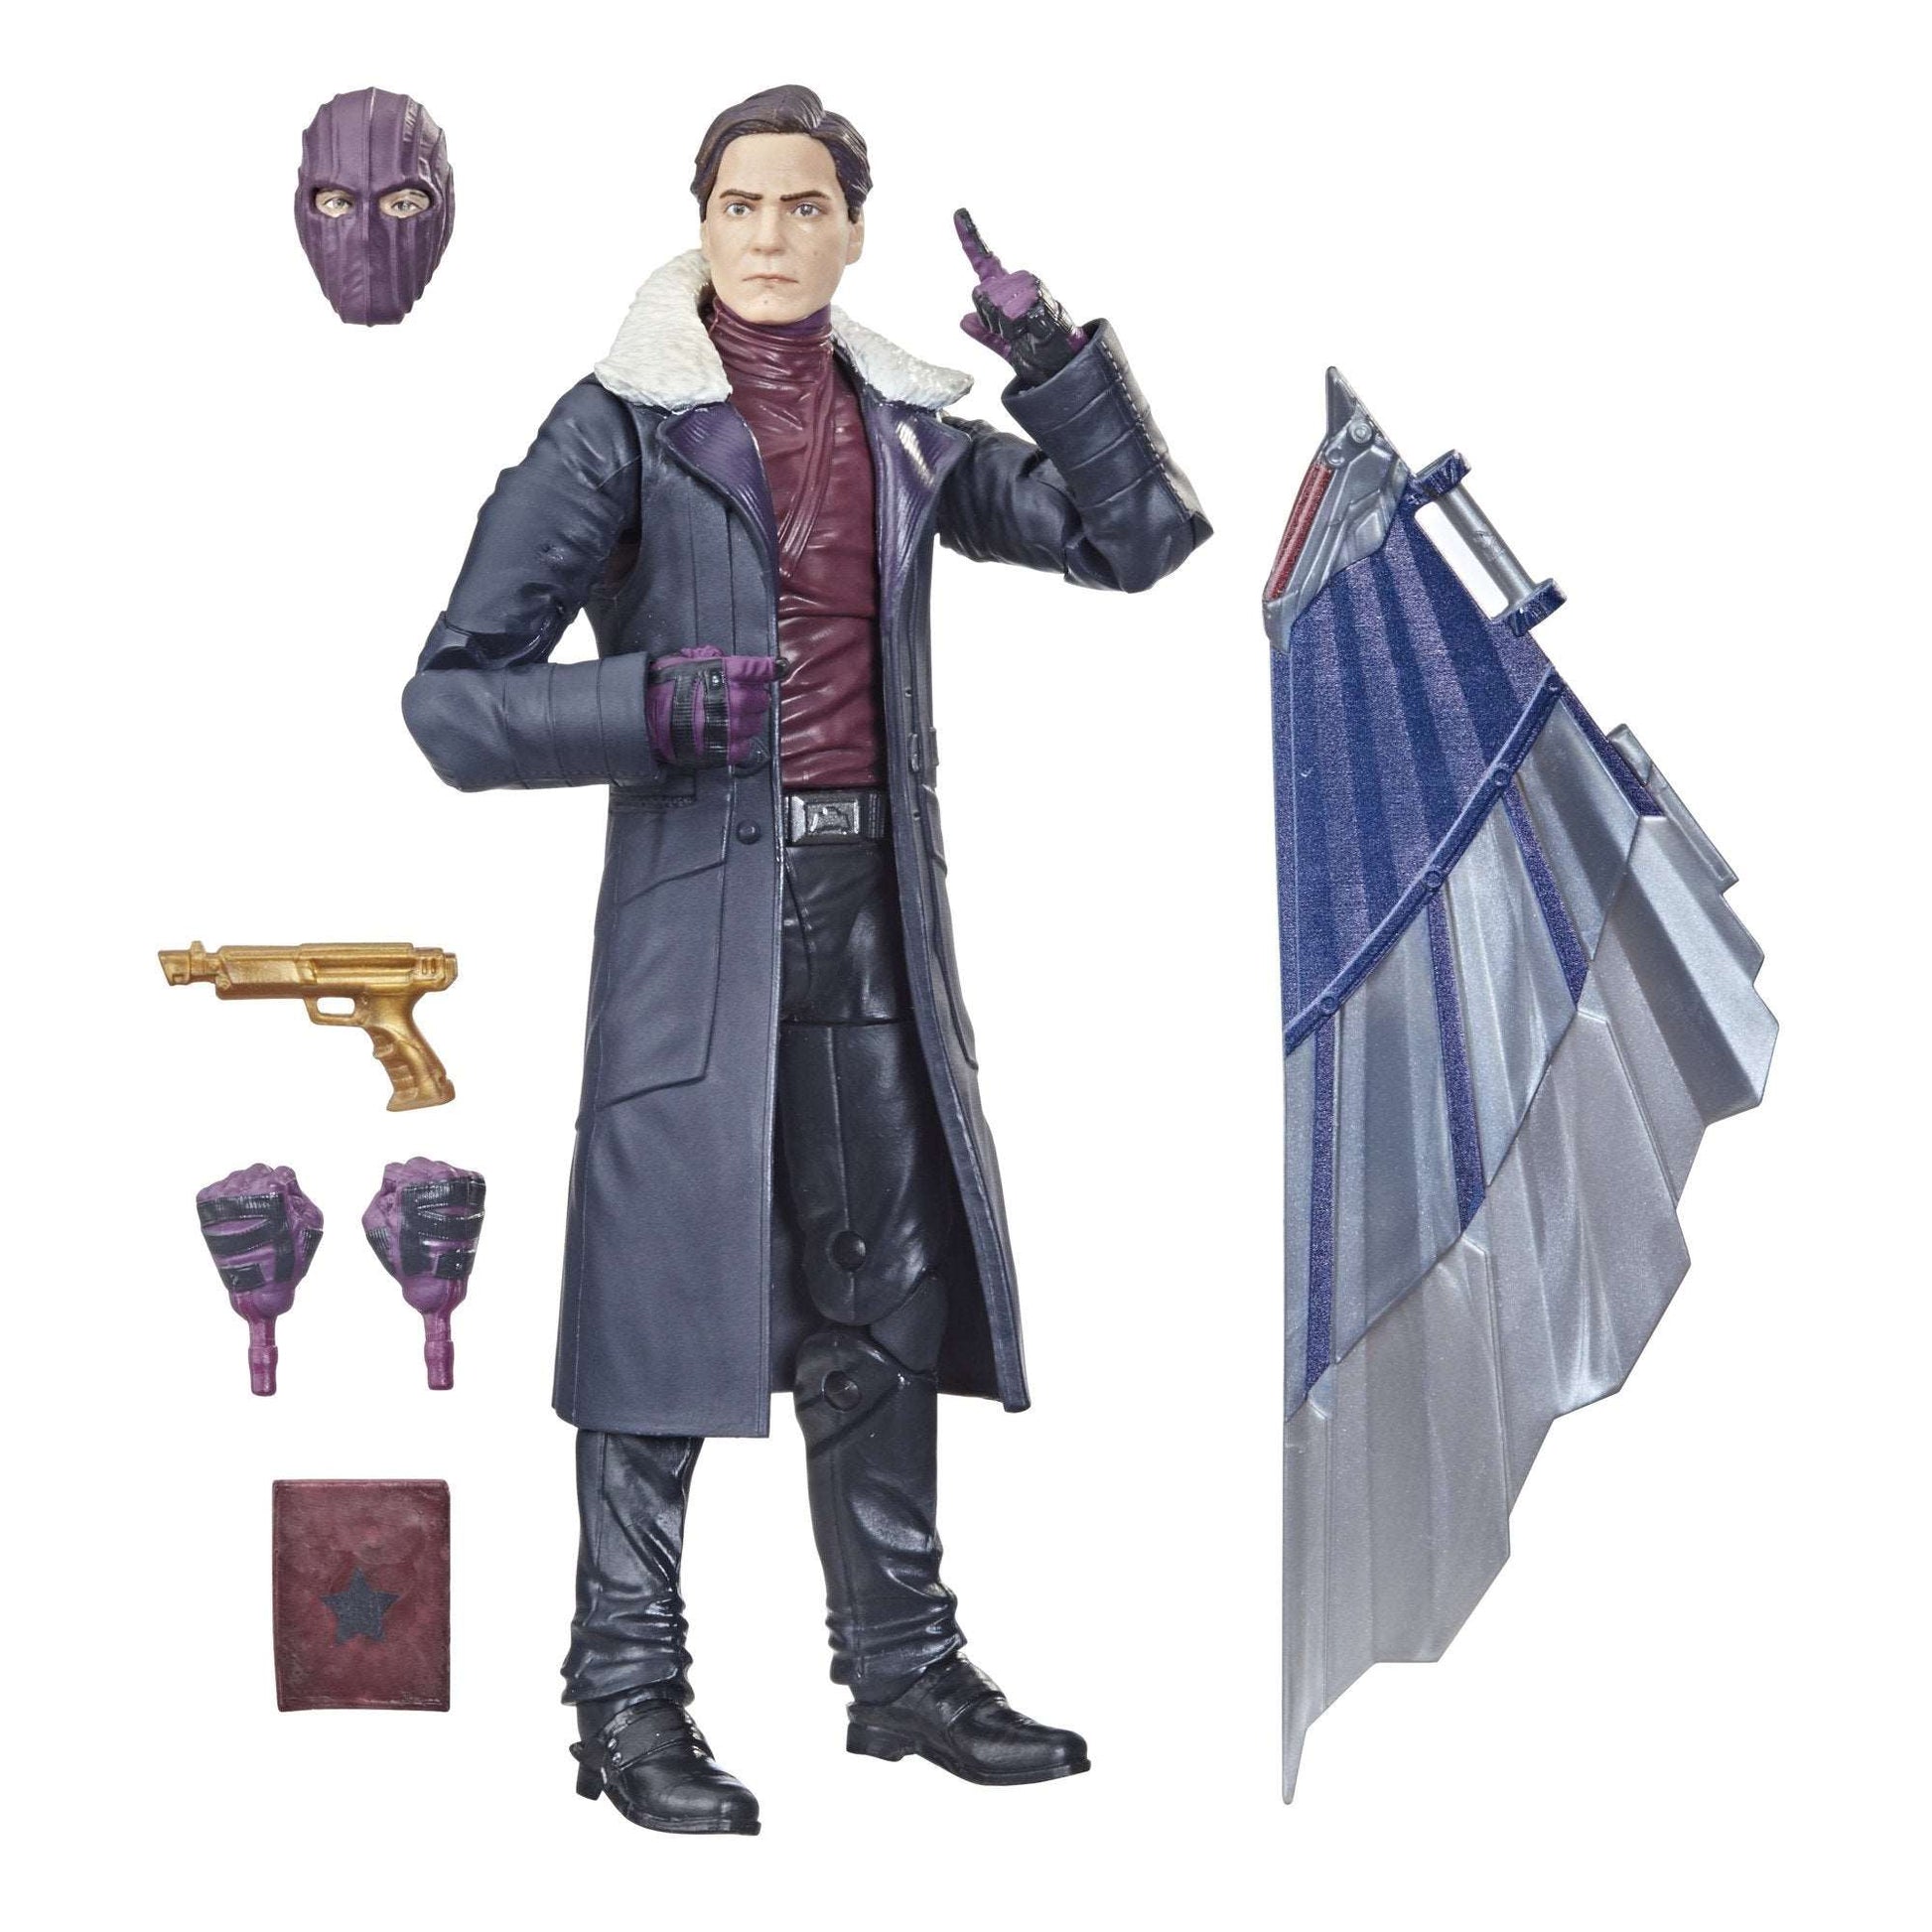 Hasbro Marvel Legends Series Disney+ Avengers Falcon and the Winter Soldier Baron Zemo figure and accessories